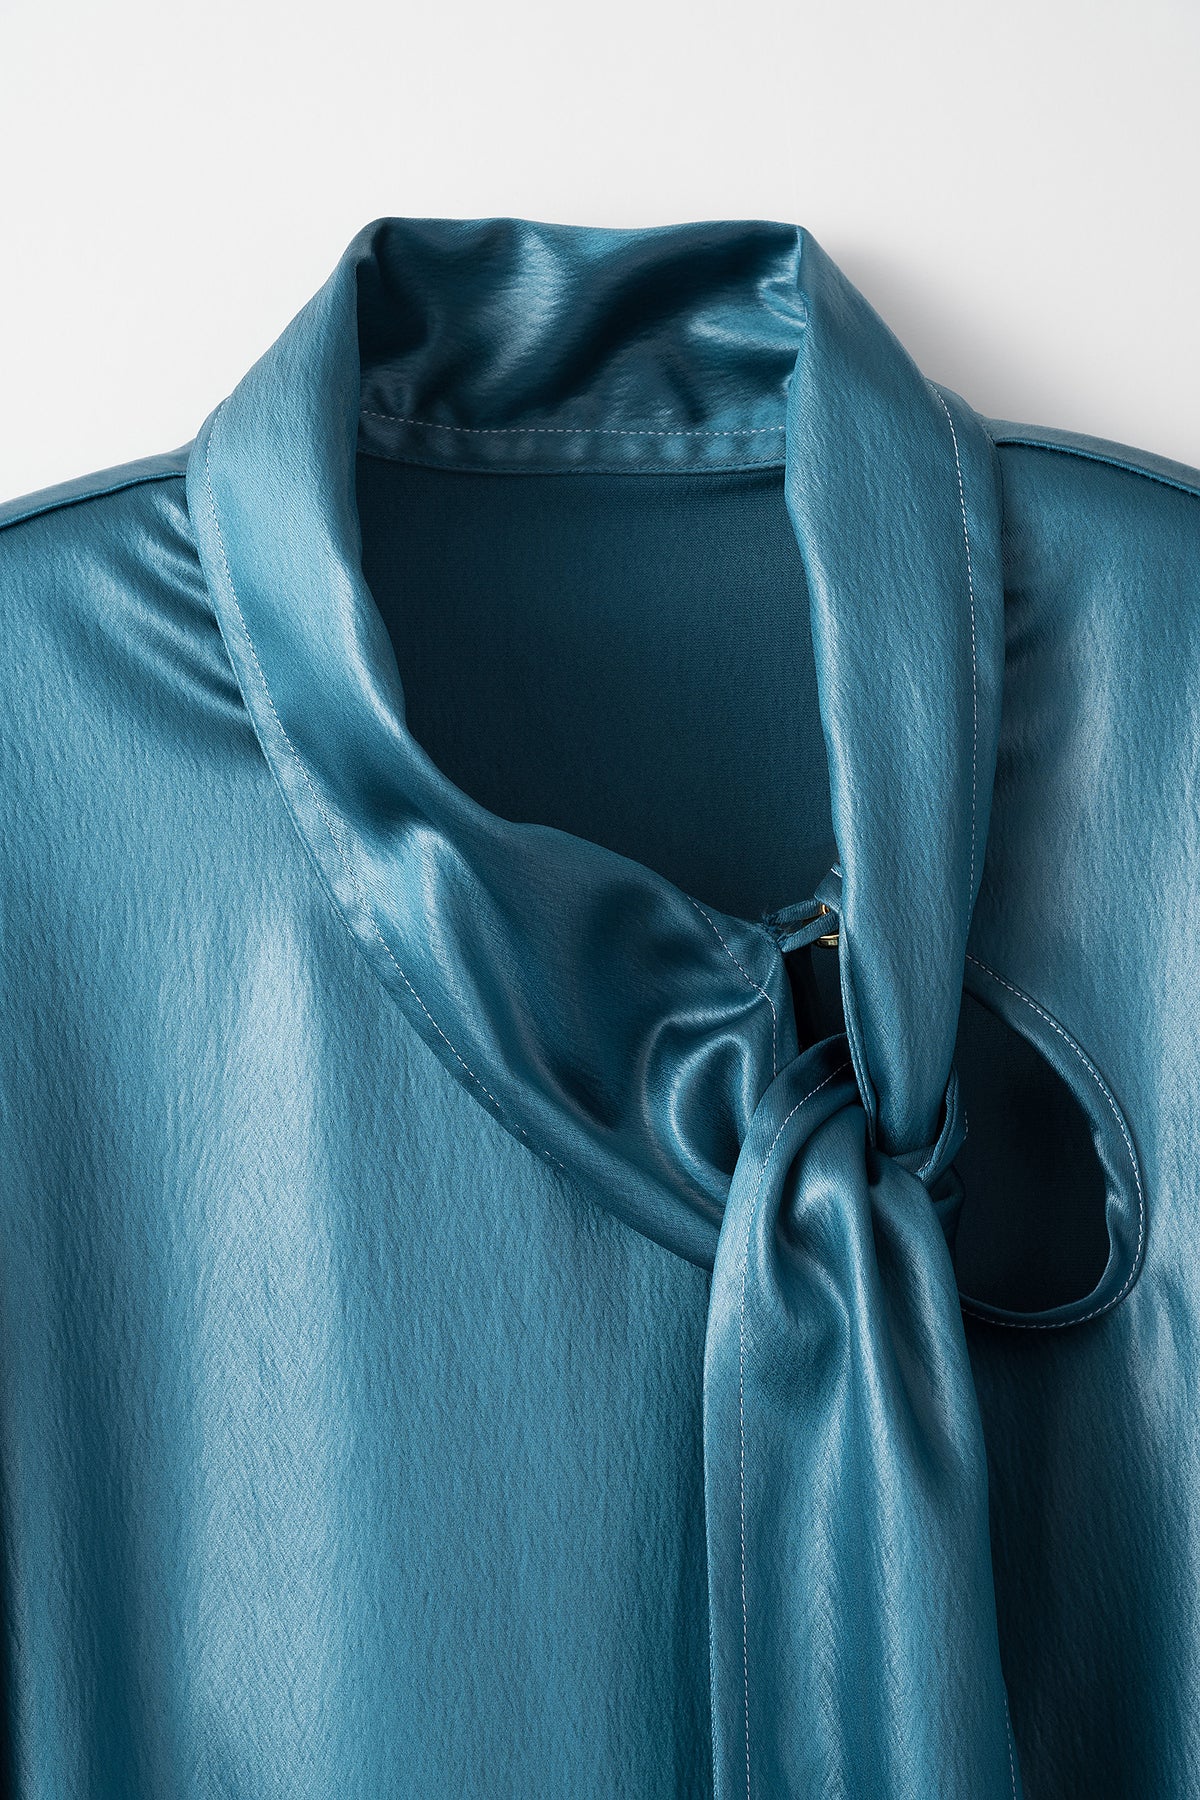 Scarf blouse (Turquoise blue)